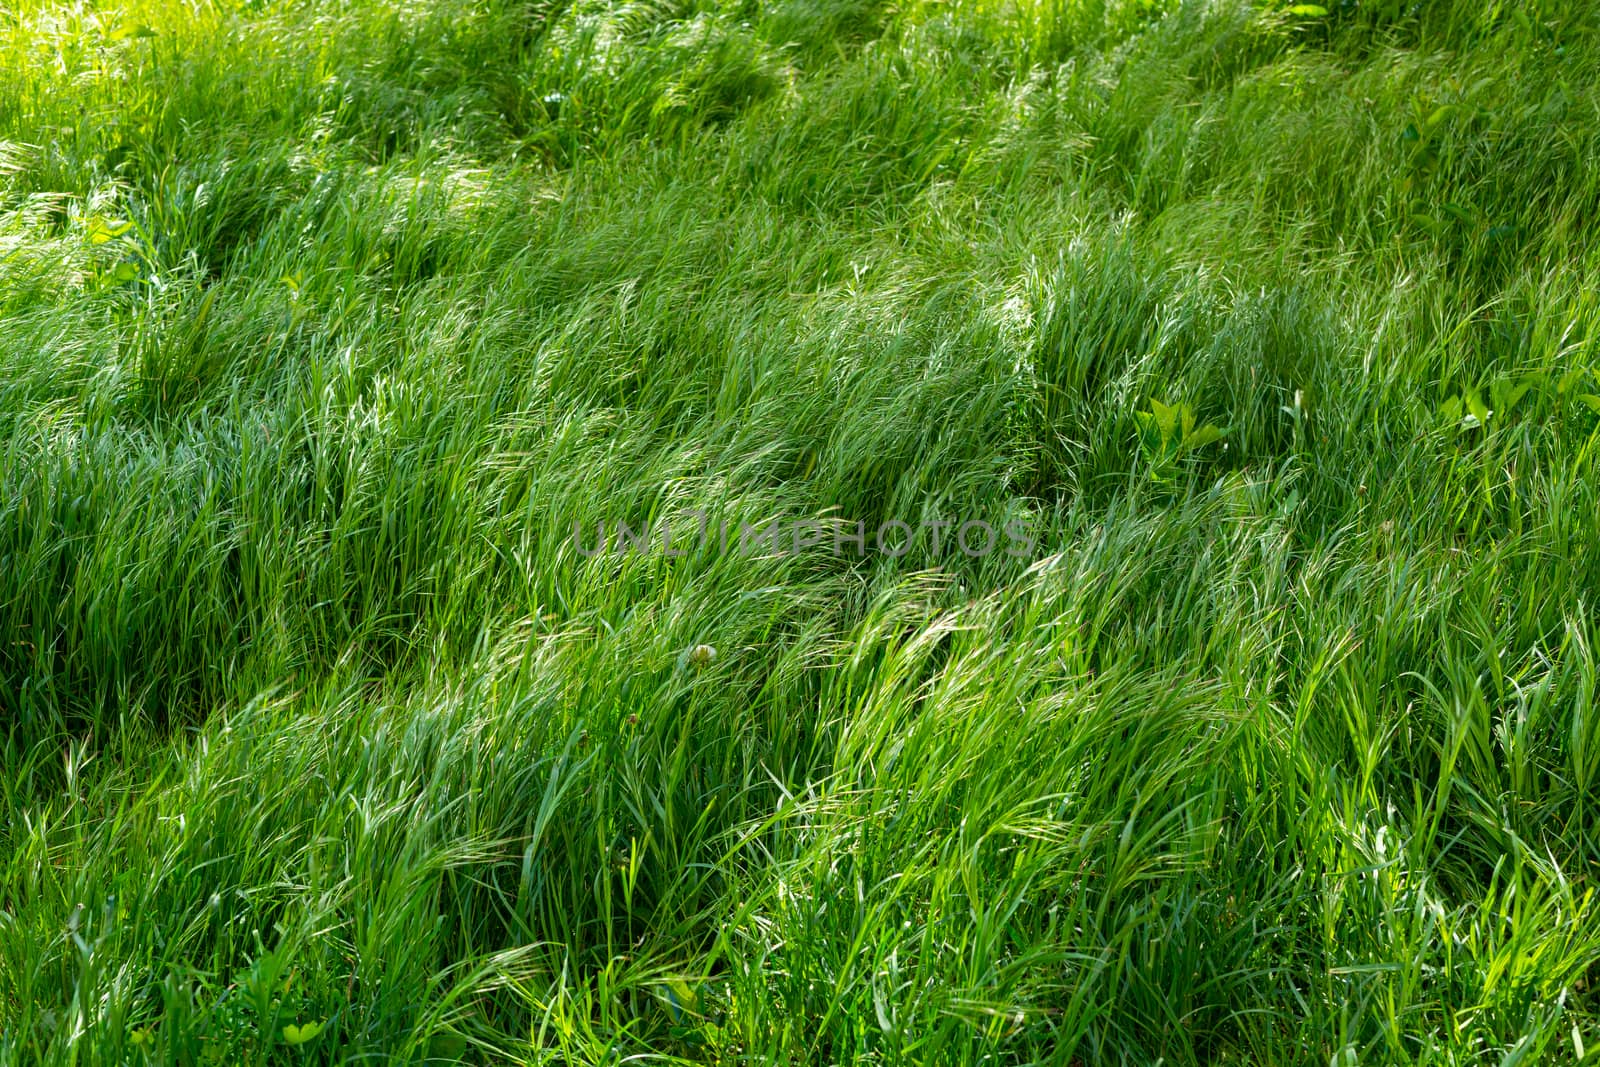 Background of young, large and lush green grass